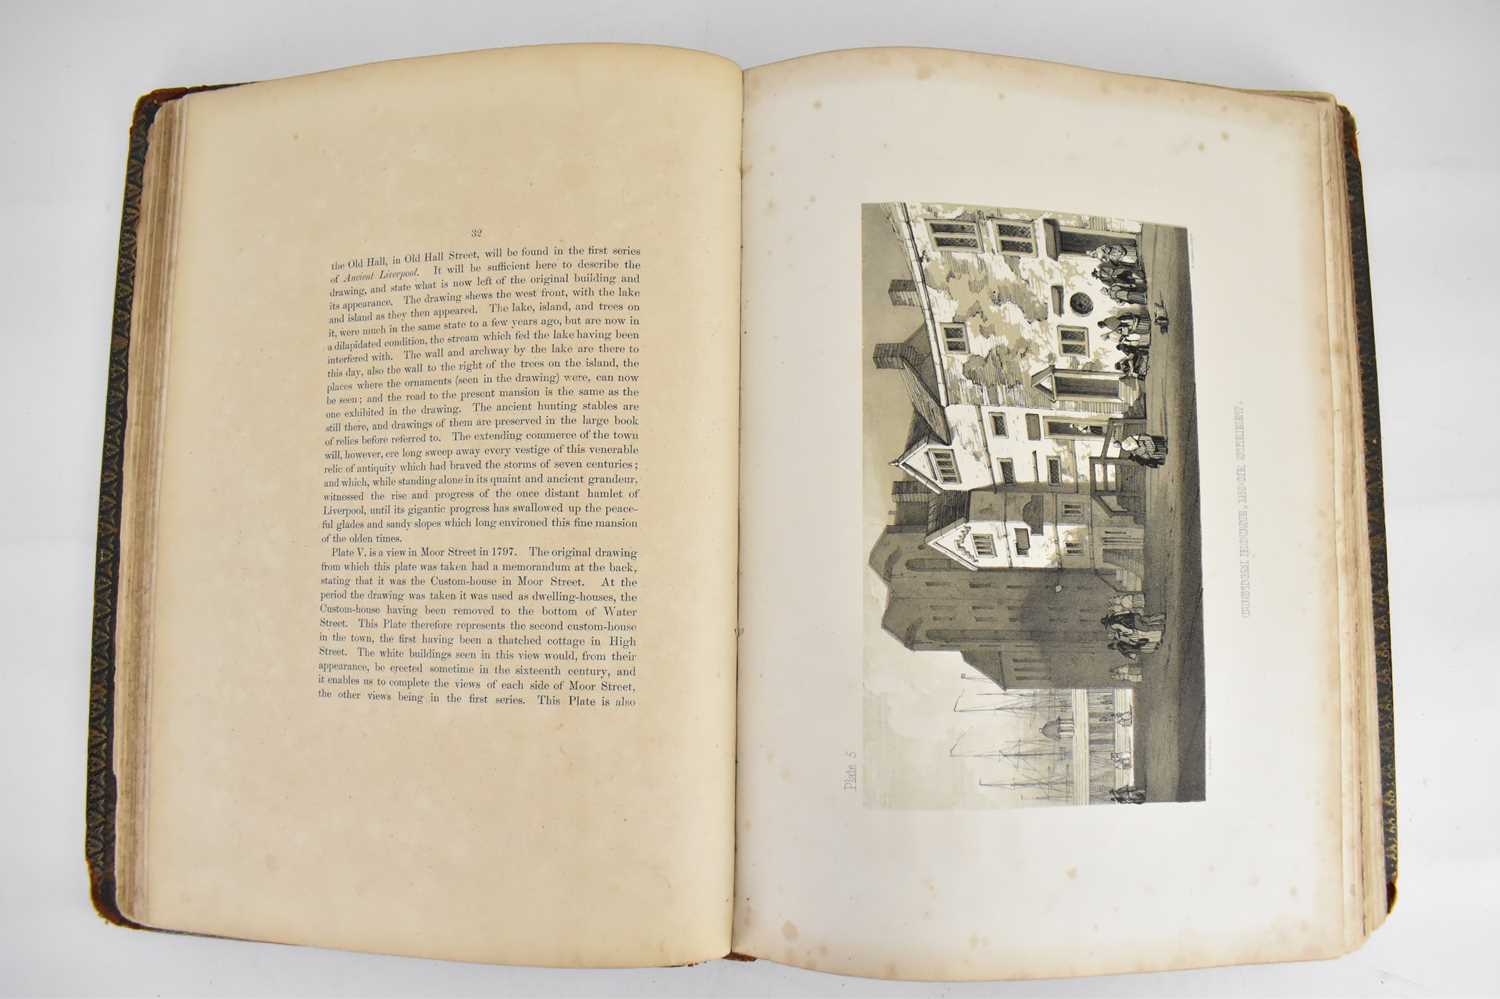 WILLIAM HERDMAN; 'Pictorial Relics of Ancient Liverpool', accompanied with descriptions of the - Image 10 of 10